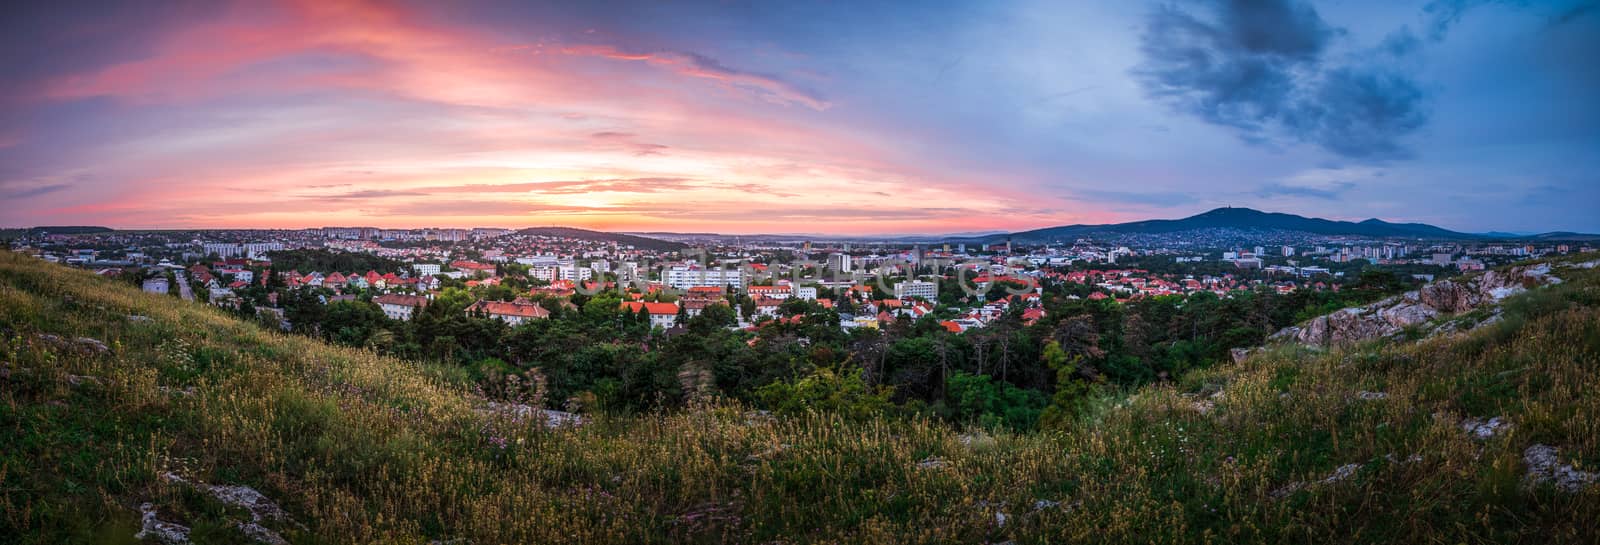 Panorama of the City of Nitra as Seen from Calvary at Sunset